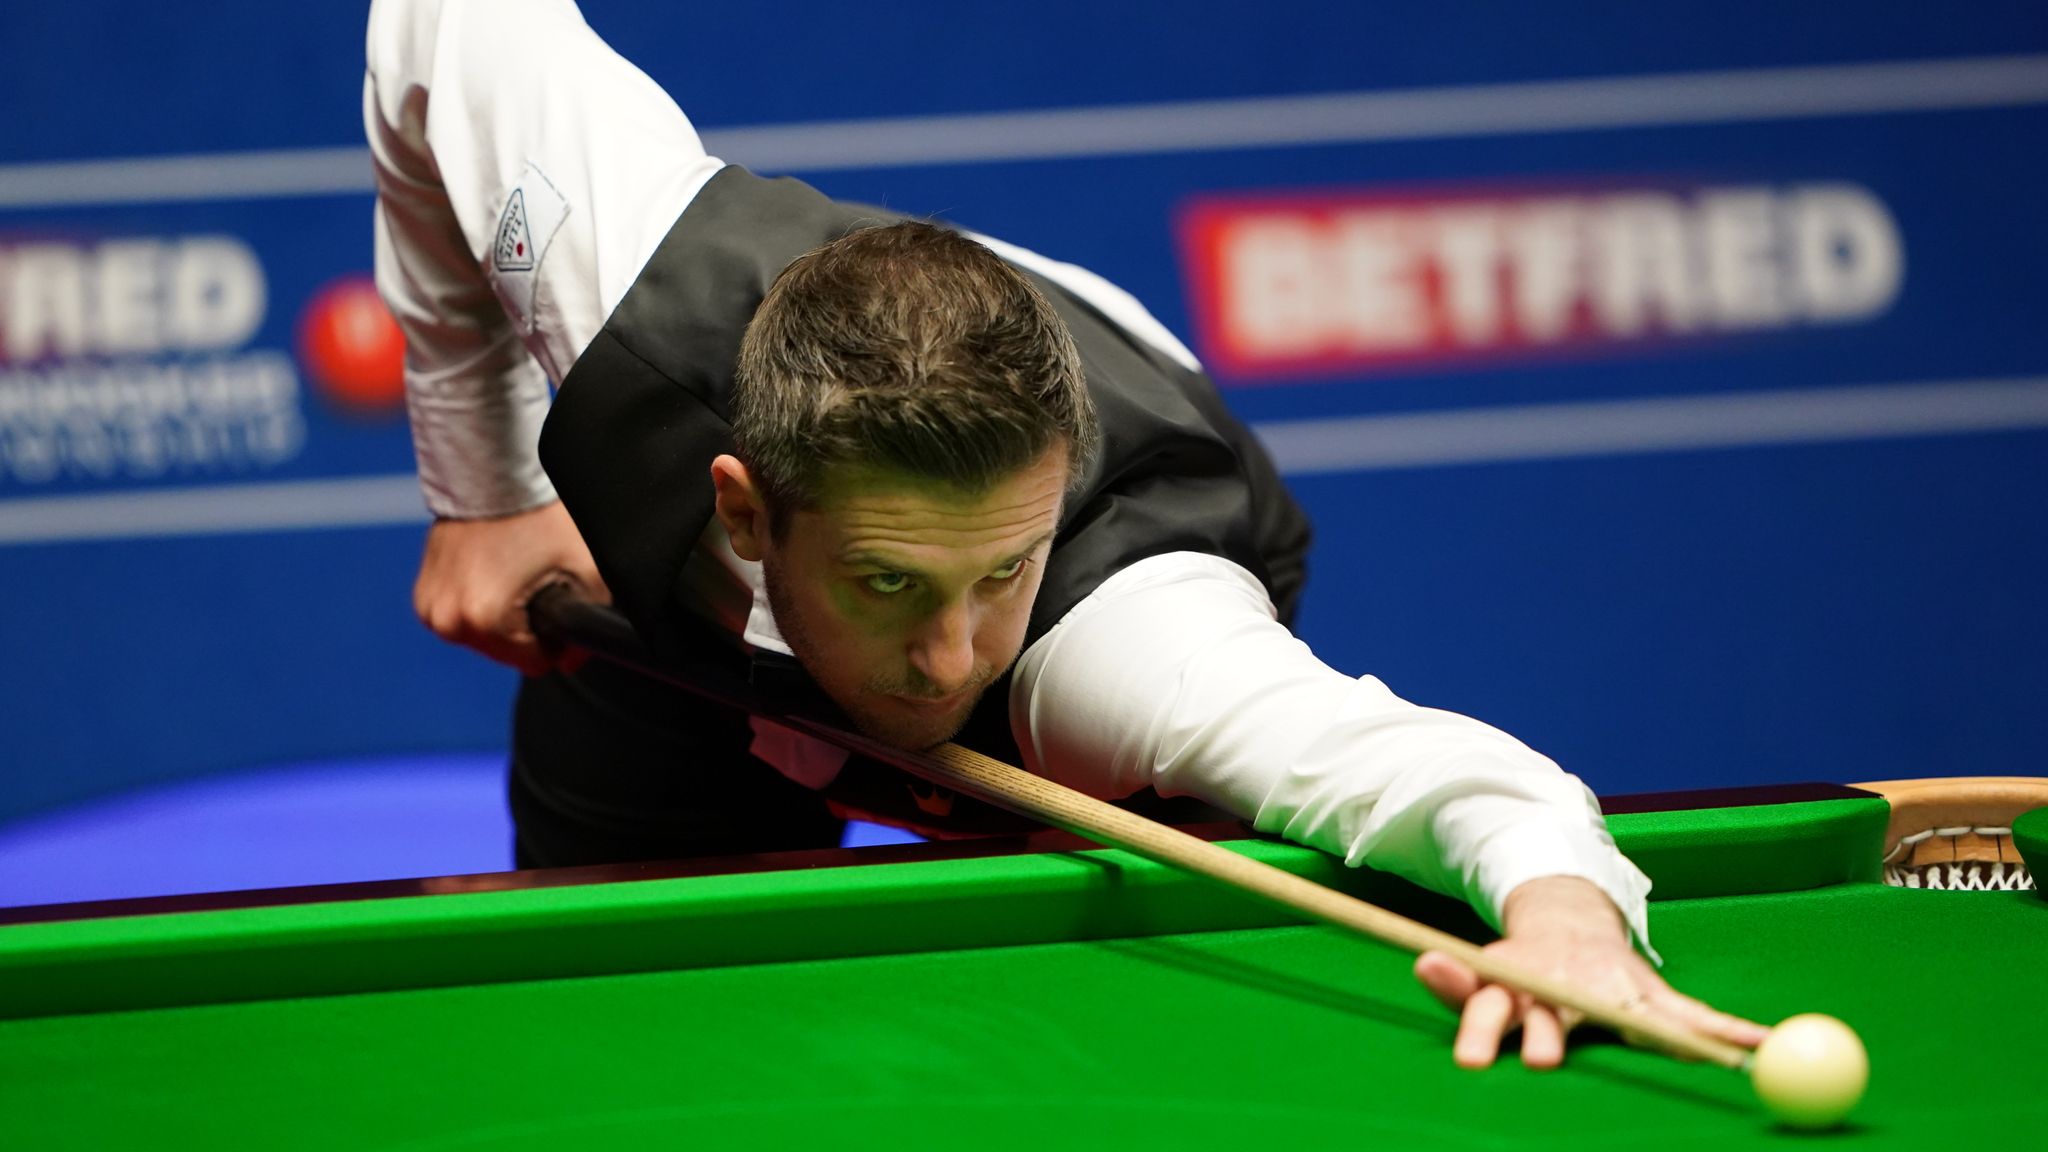 World Snooker Championship Mark Selby warned for slow play as Stuart Bingham edges ahead at Crucible Snooker News Sky Sports